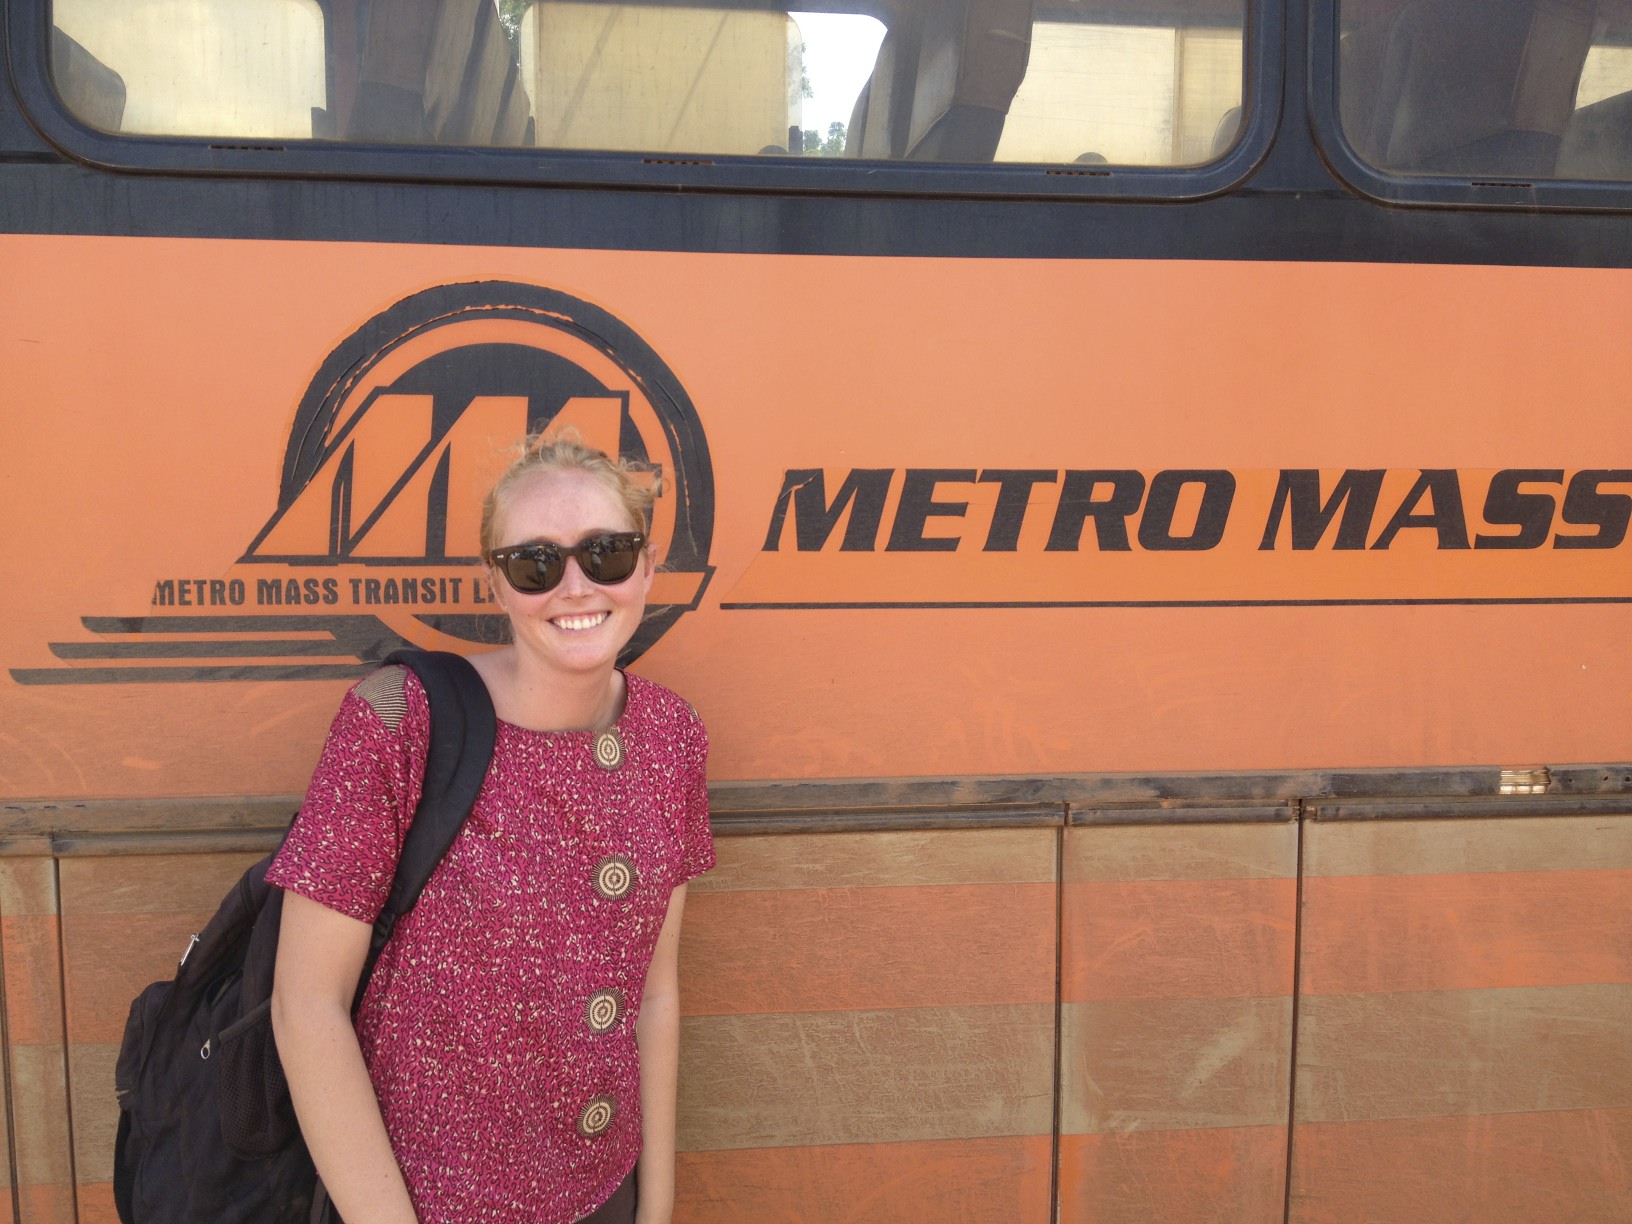 Posing with my favorite logo. Metro Mass: Moving the Nation